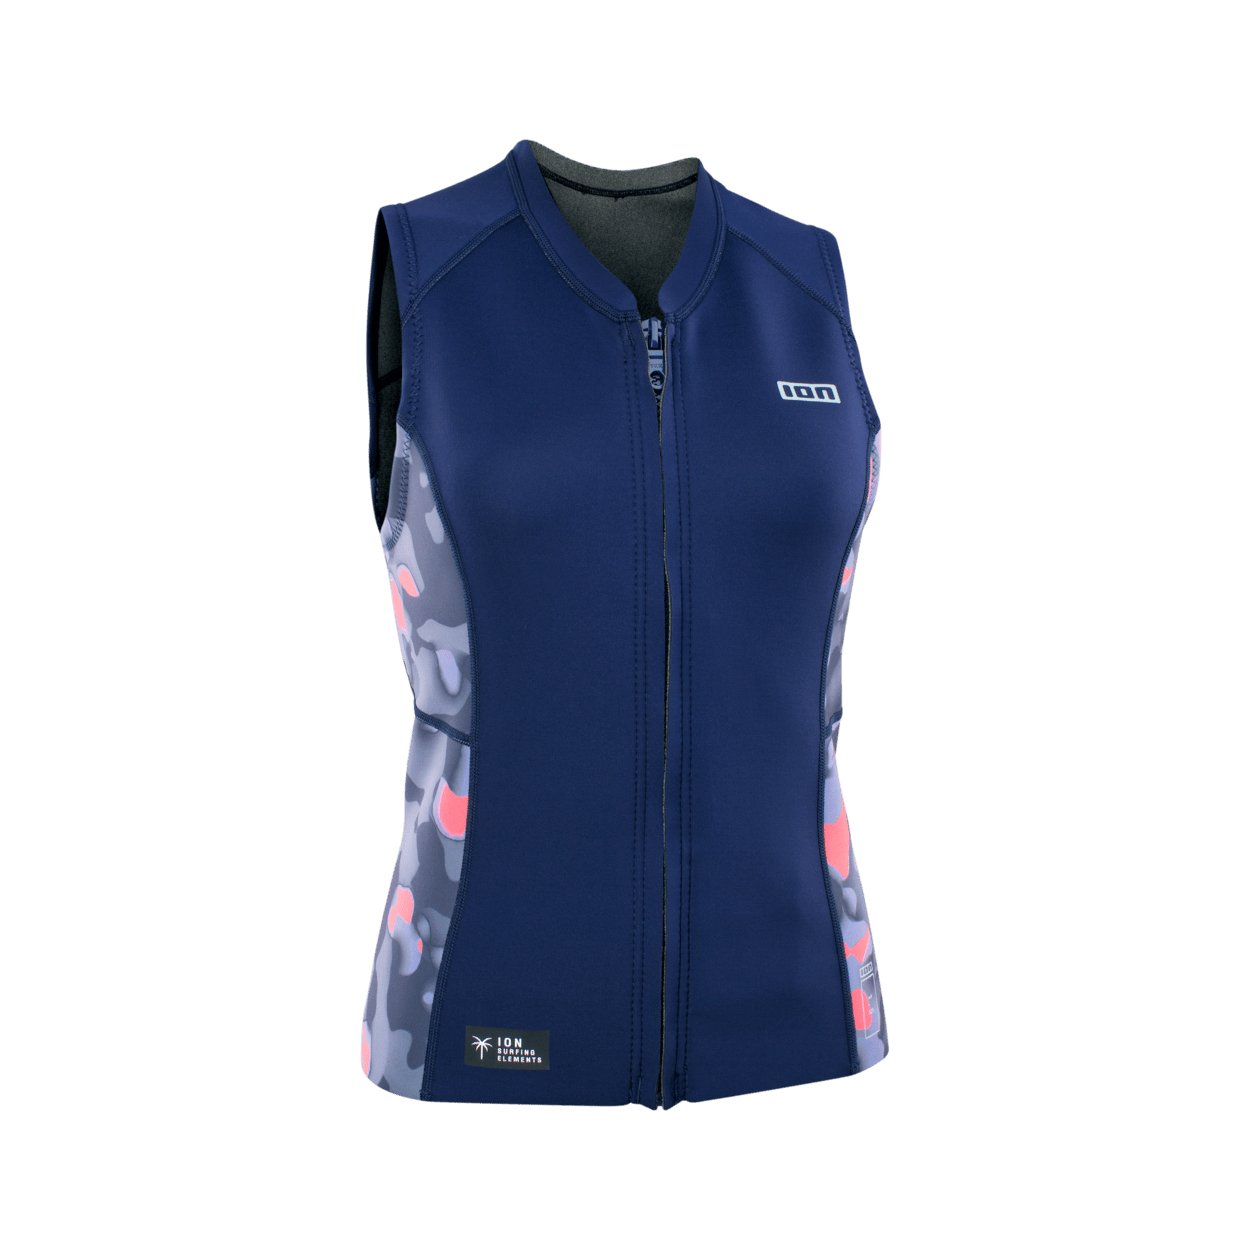 ION Neo Zip Top 1.5 SS 2022 - Worthing Watersports - 9010583059327 - Tops - ION Water